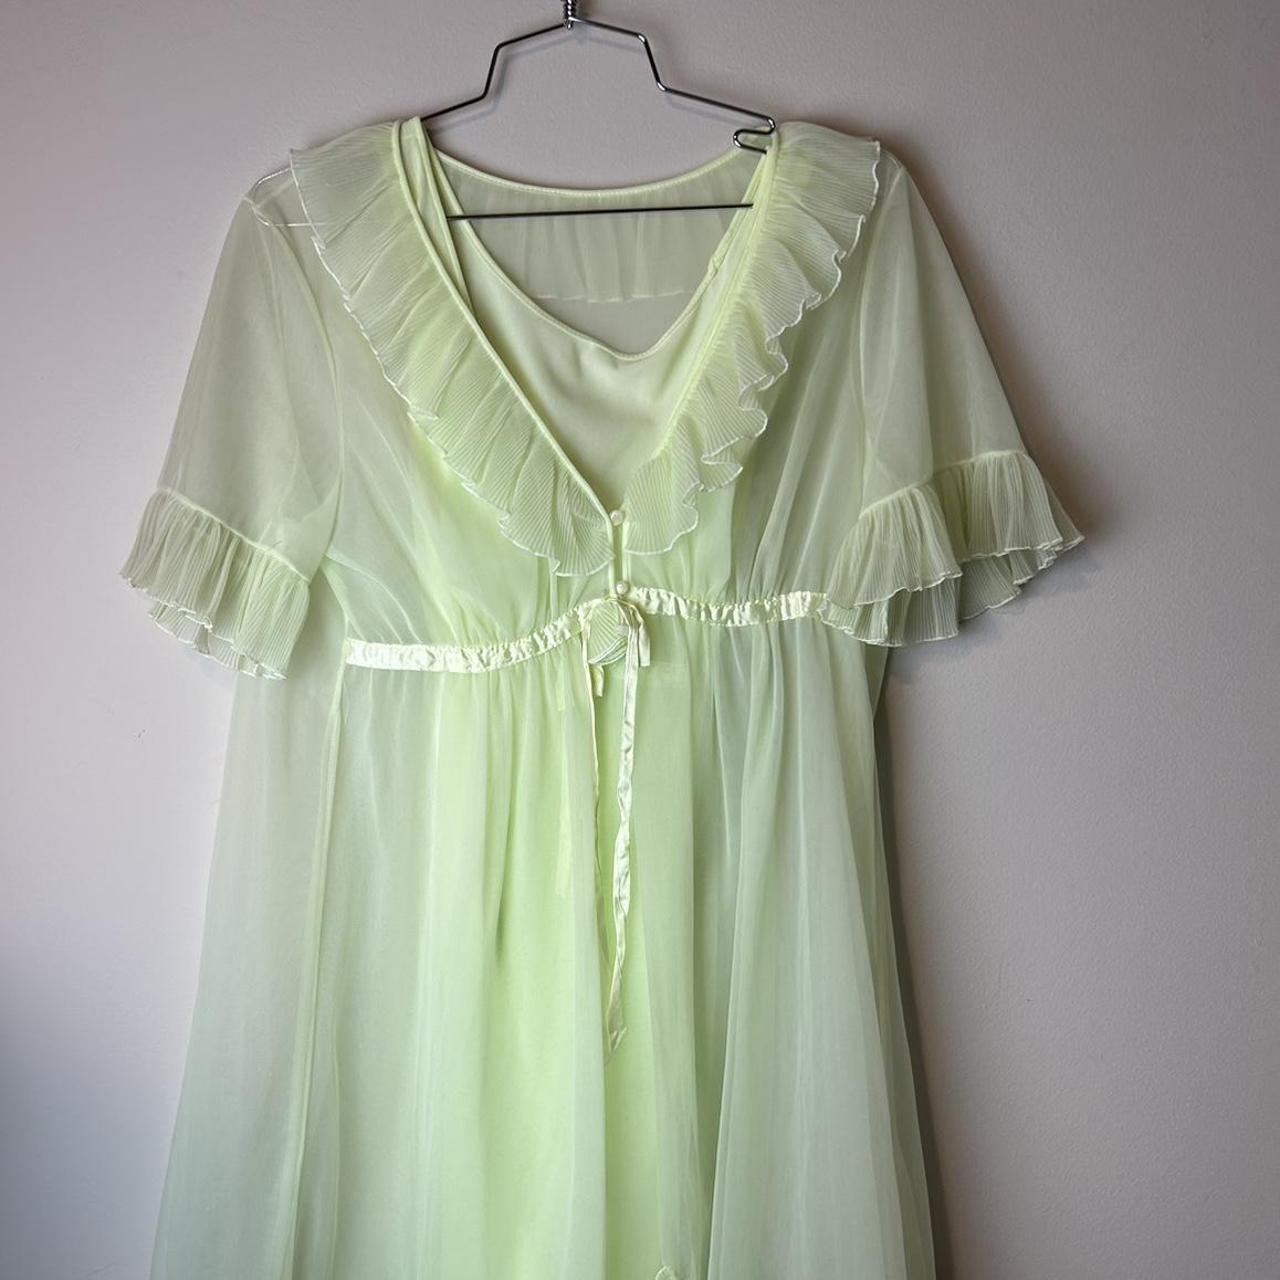 Vintage Green Sheer Sears Nightgown and Robe Great... - Depop